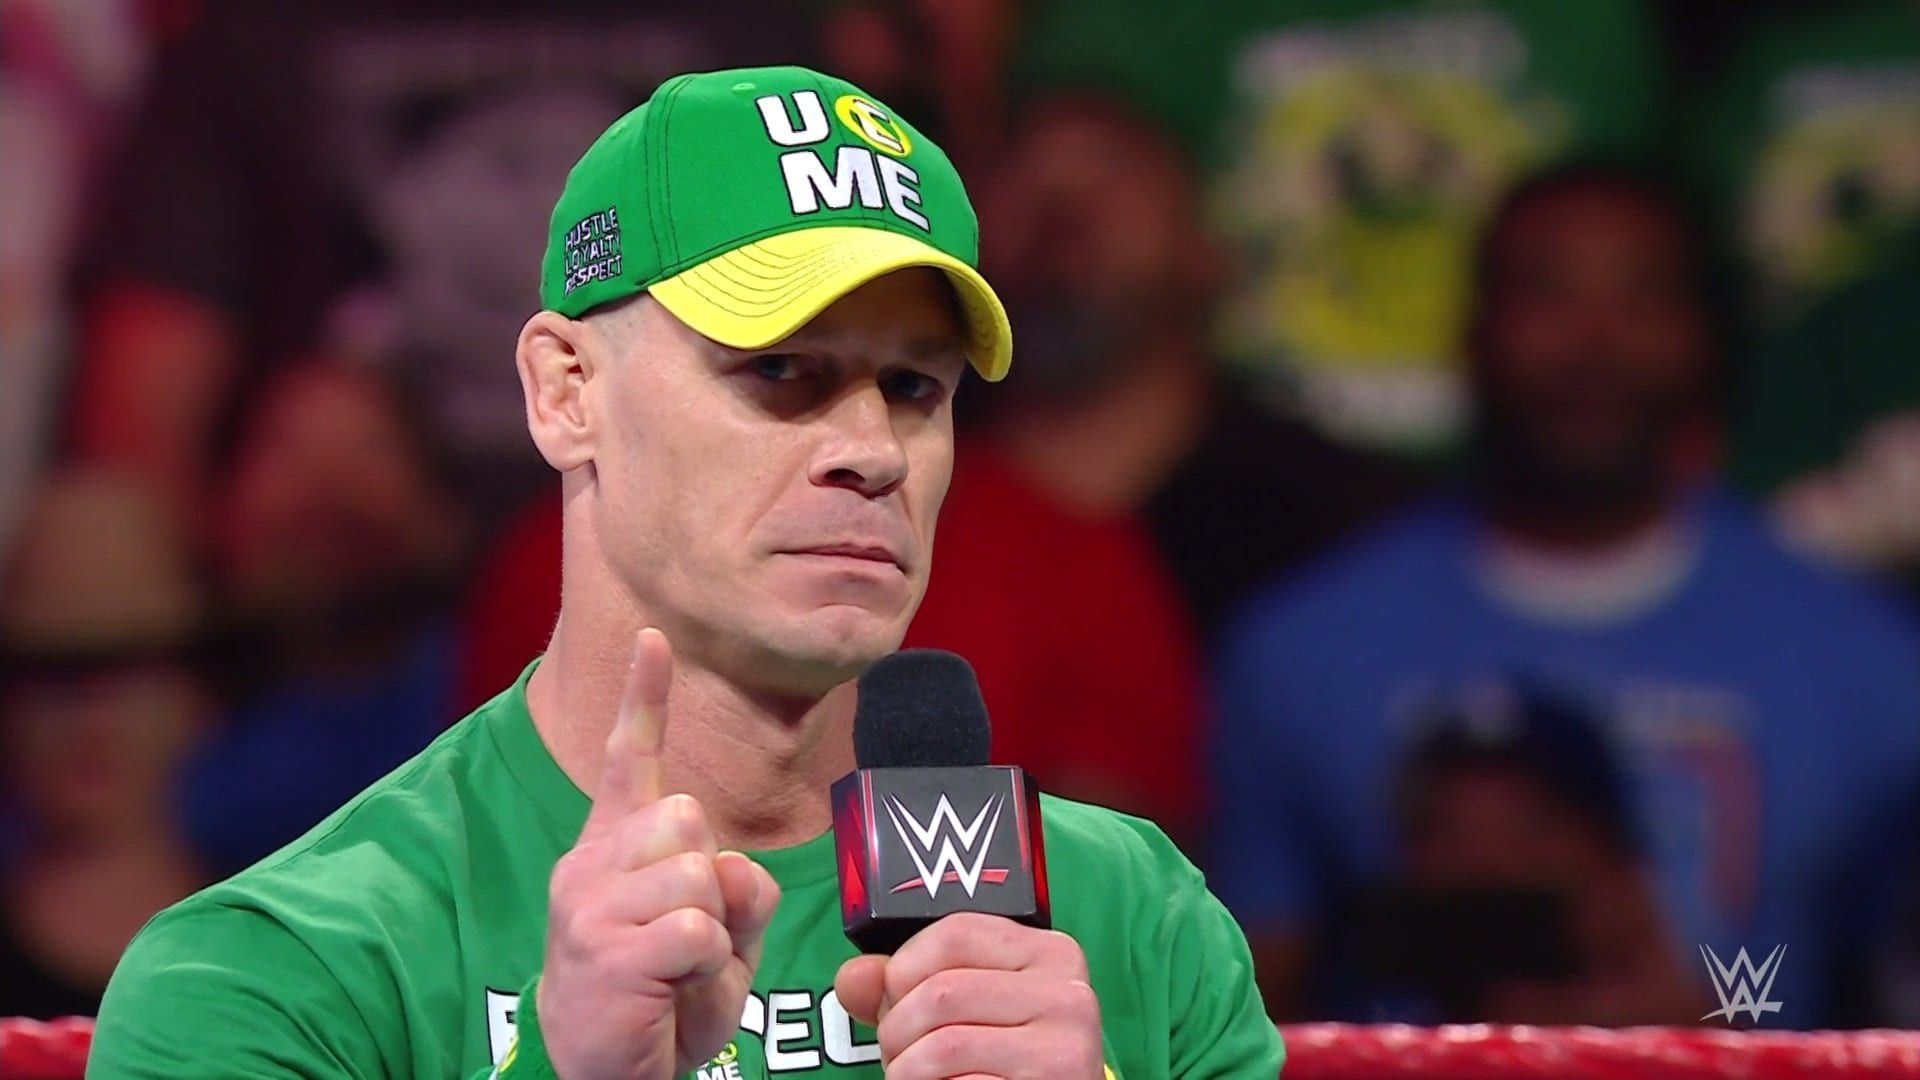 John Cena seems to be setting up his targets ahead of his return